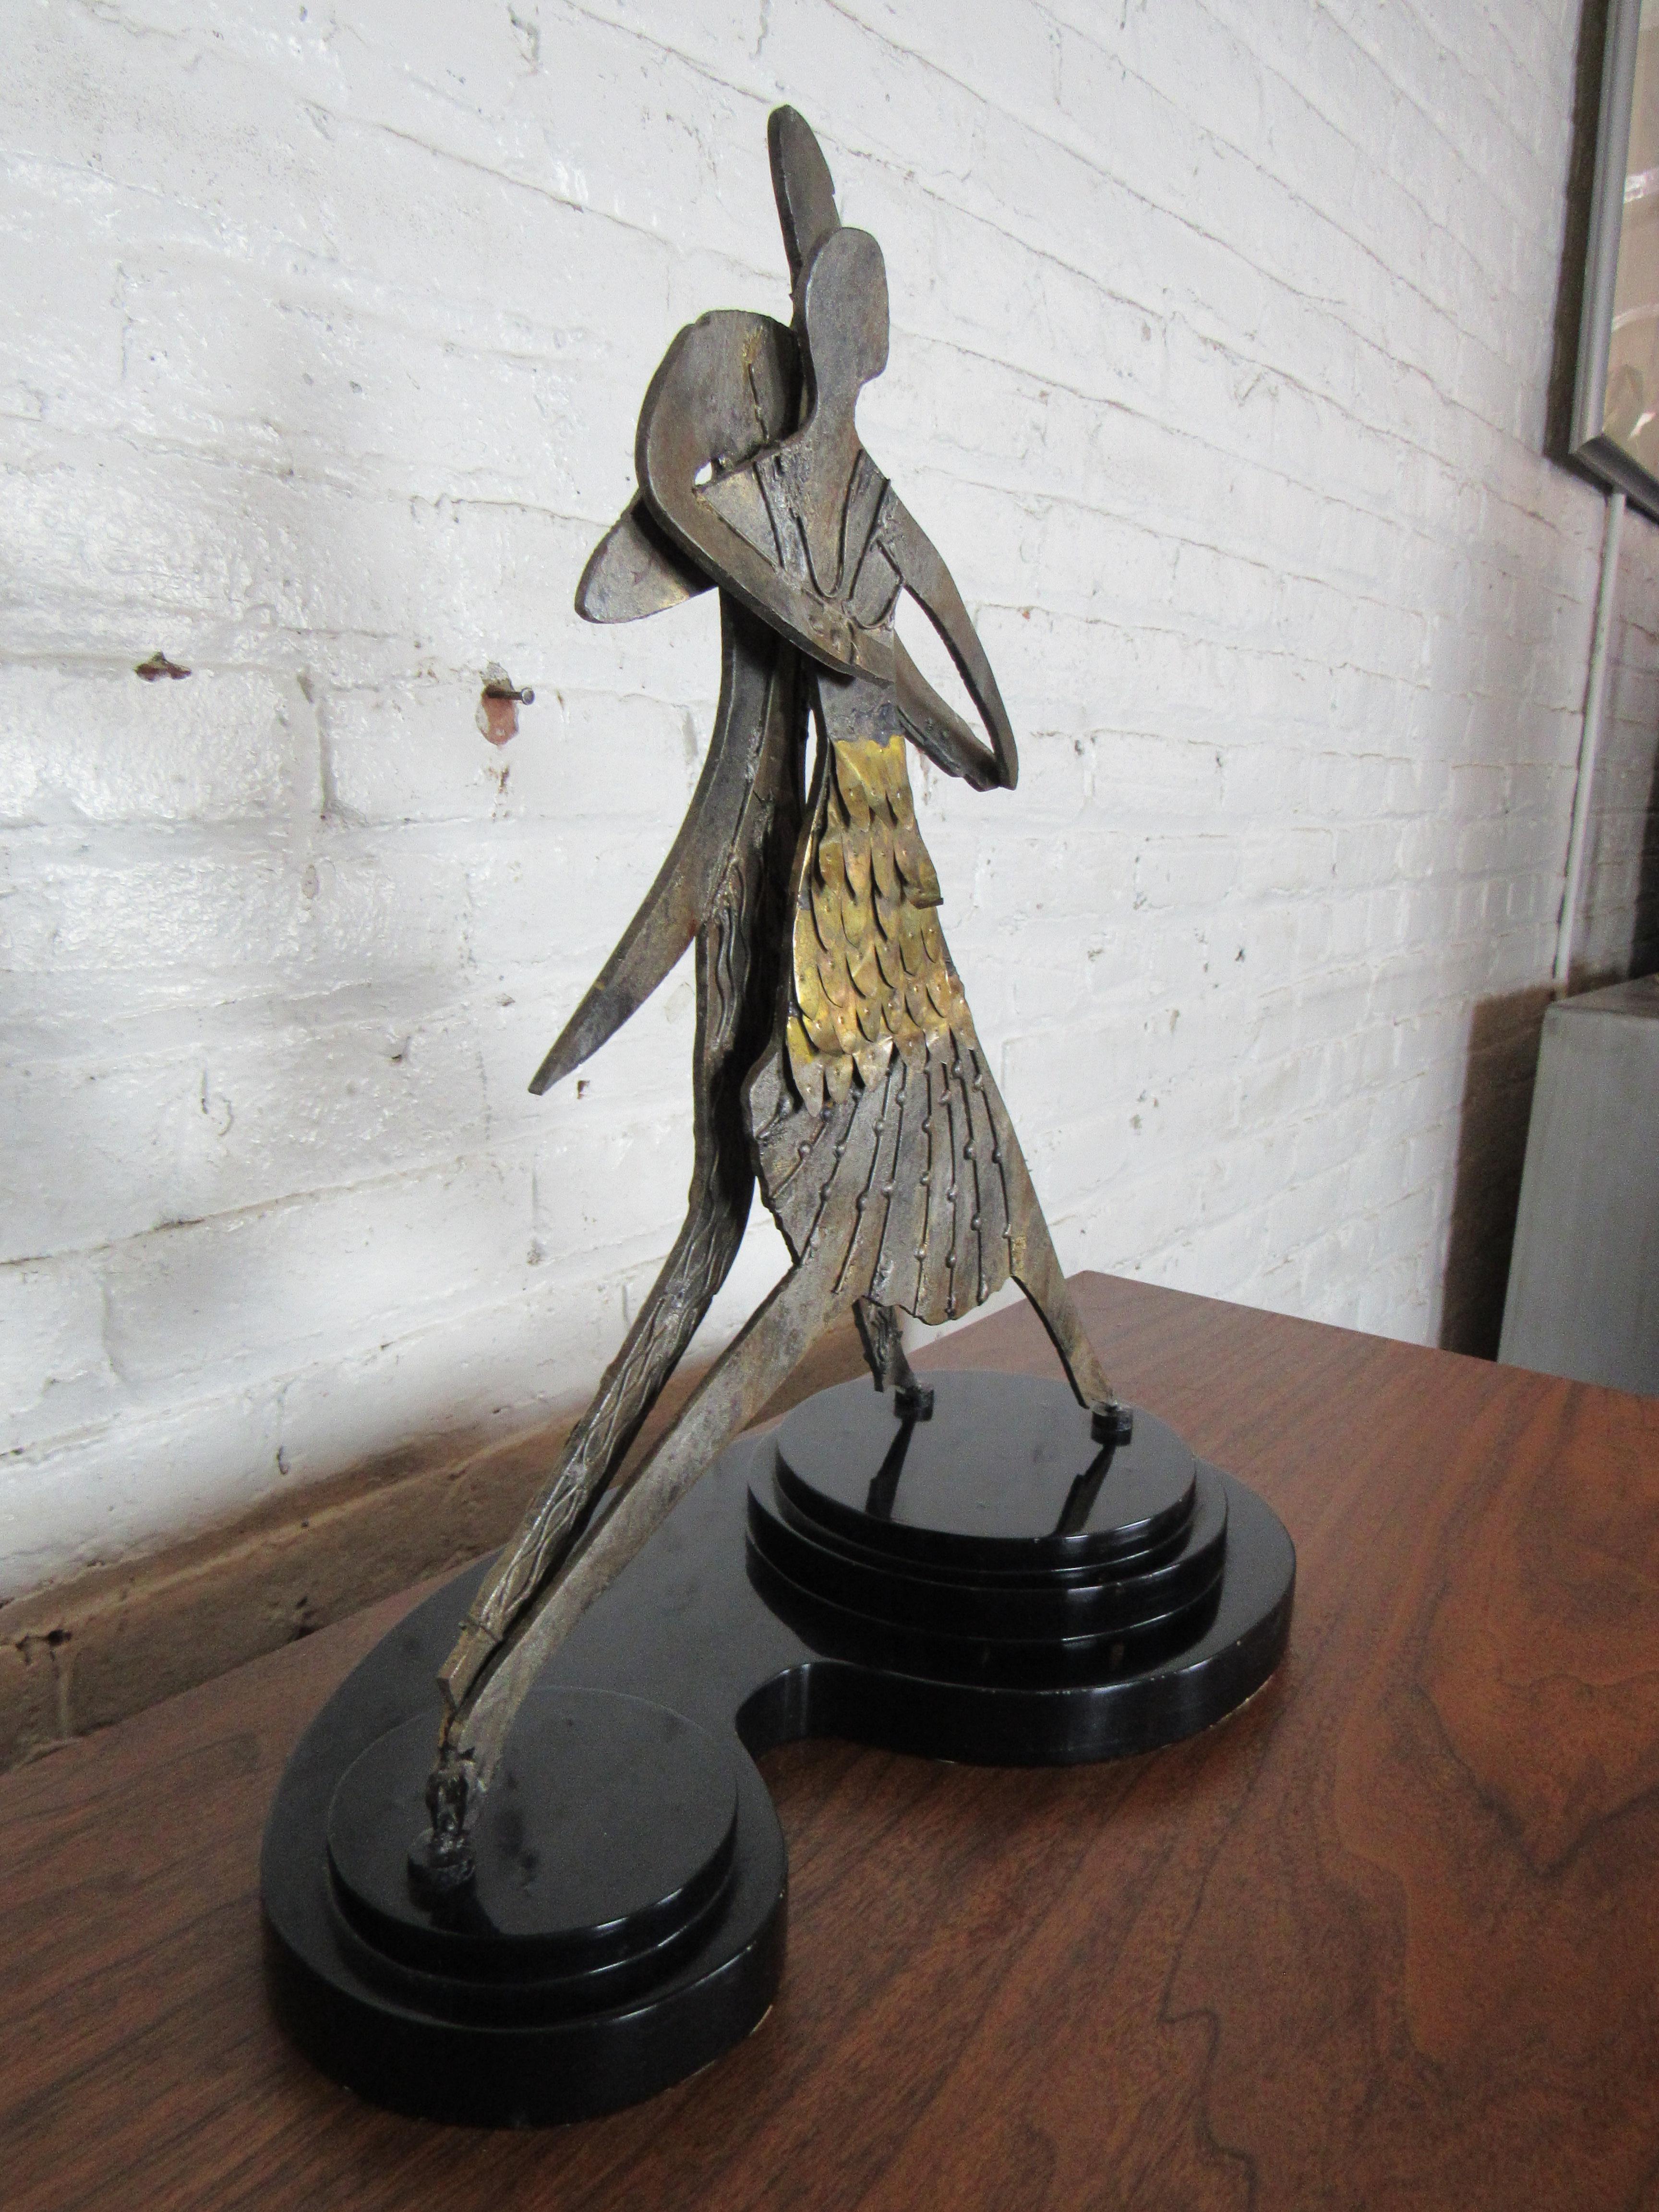 A pair of dancing figures are featured in this vintage table-top sculpture. A heavy plastic base with velvet on its bottom ensures it can be used in any area as a great decorative item. Please confirm item location with seller (NY/NJ).